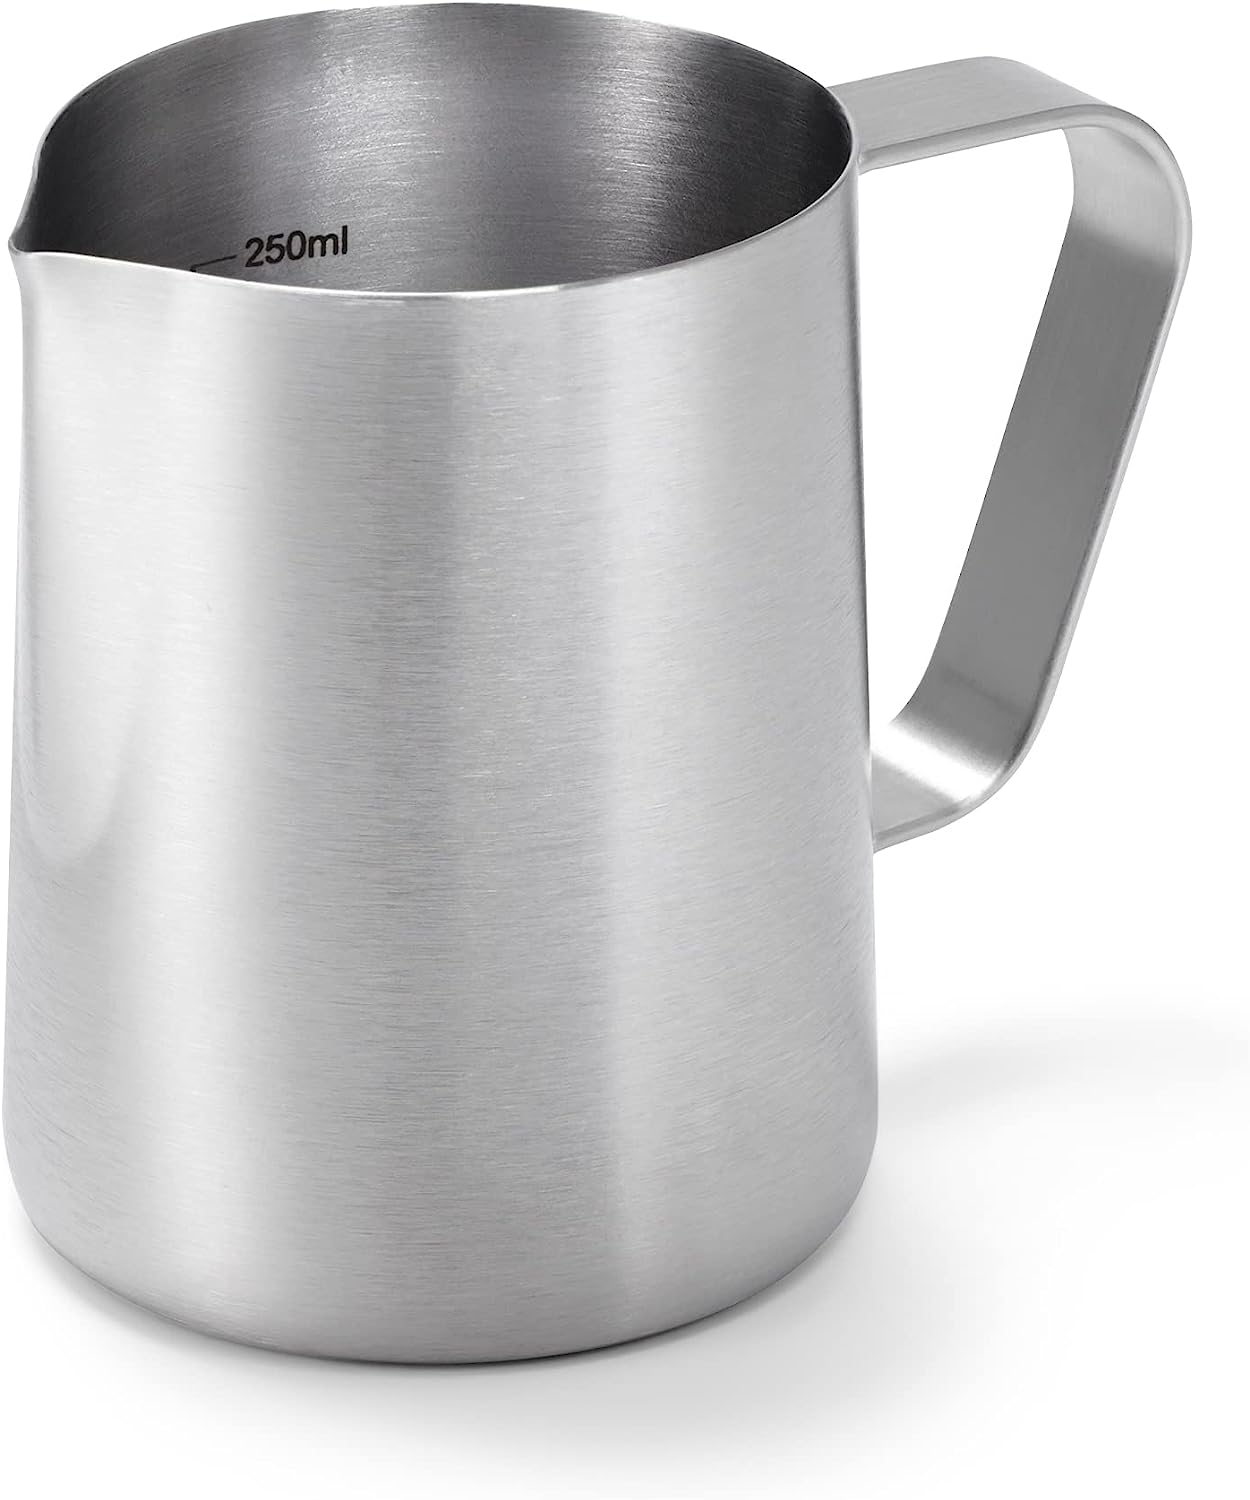 Tchibo Milk Jug for Preparing Milk Specialities Search as Latte Macchiato or Cappuccino, 300 ml, with internal scale, Stainless Steel